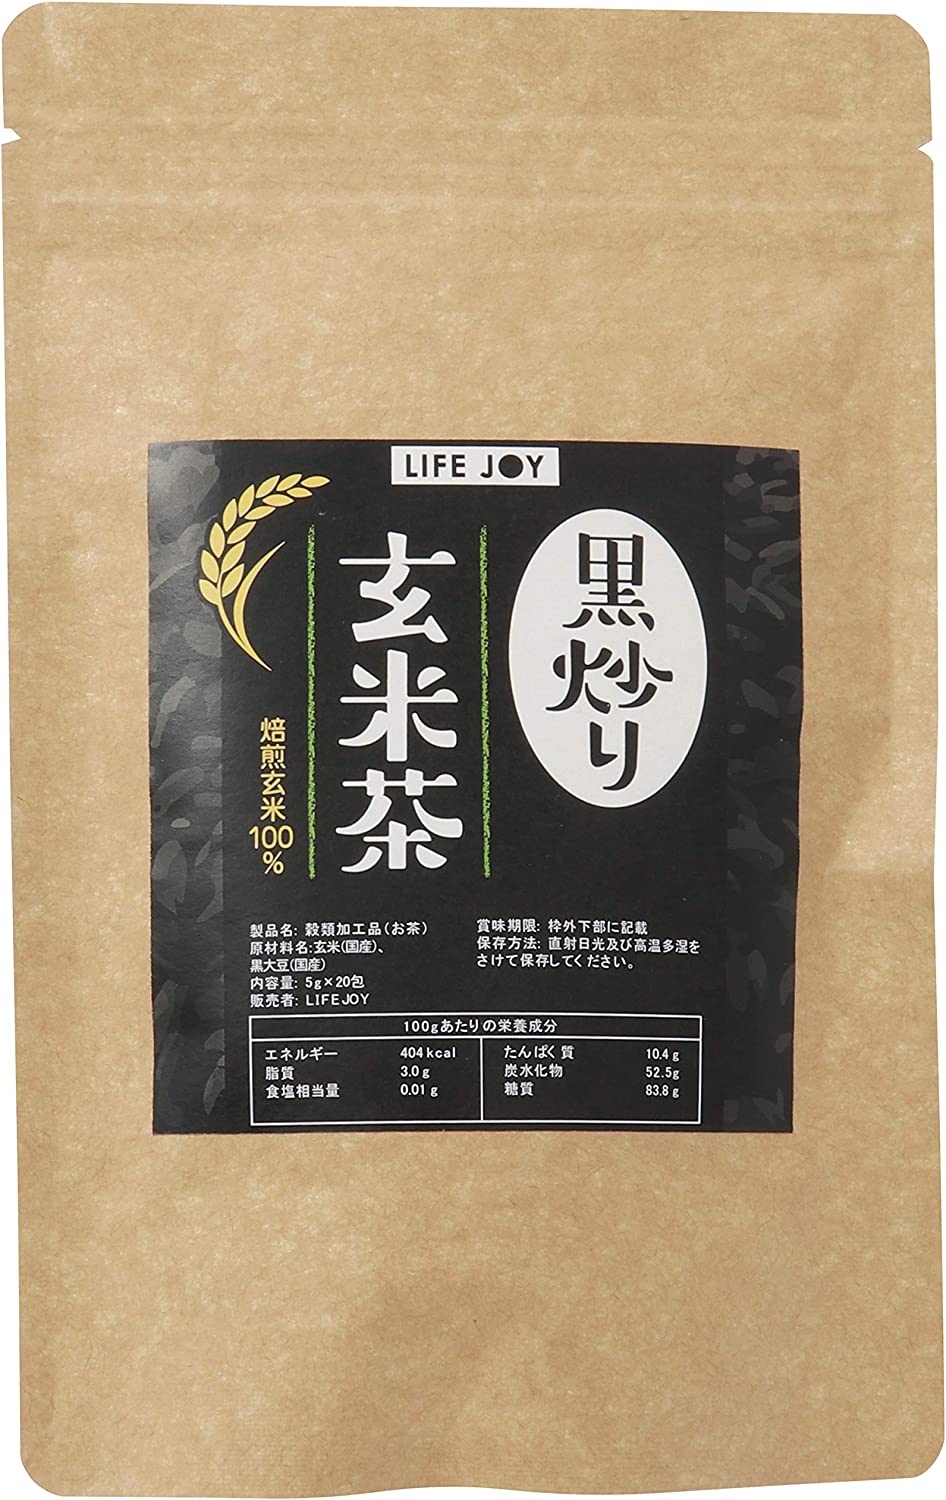 Black Roasted Brown Rice Green Tea (Genmaicha) [5 g x 20 packets with tea pack] by Lifejoy - NihonMura